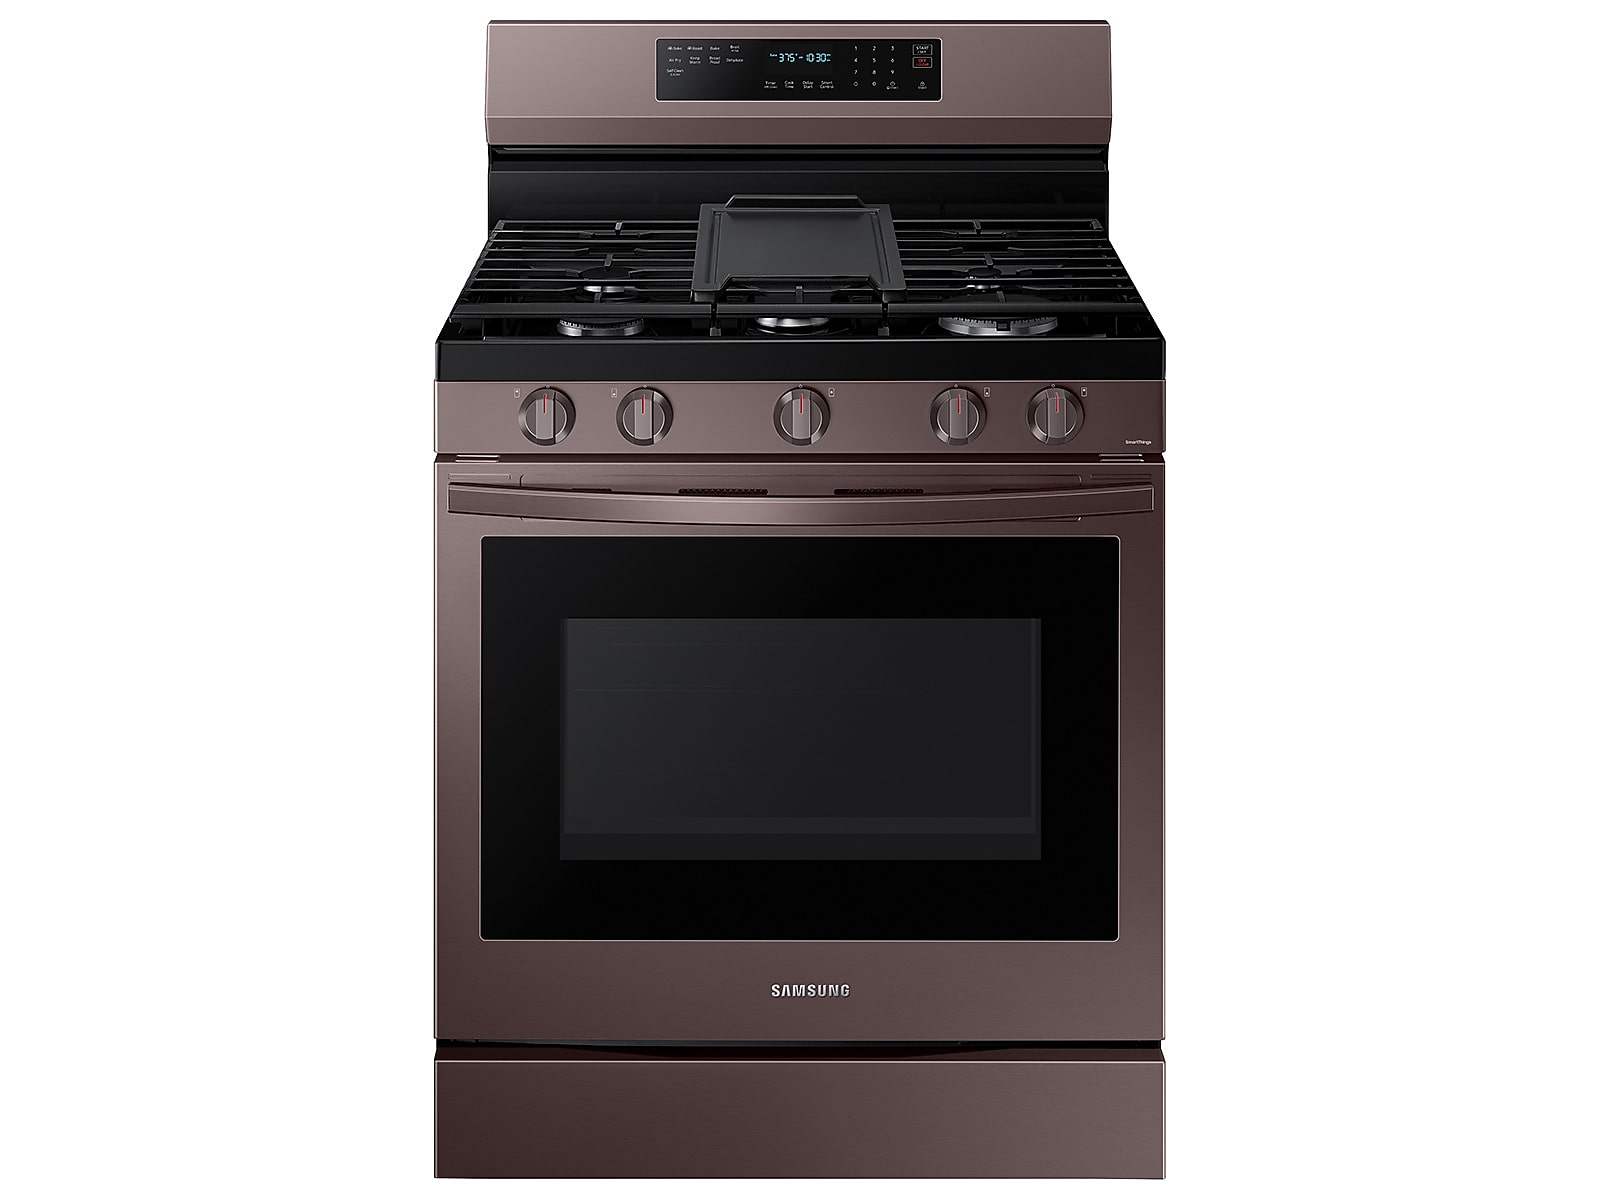 Samsung 6.0 cu. ft. Smart Freestanding Gas Range with No-Preheat Air Fry, Convection+ & Stainless Cooktop in Tuscan Stainless Steel photo